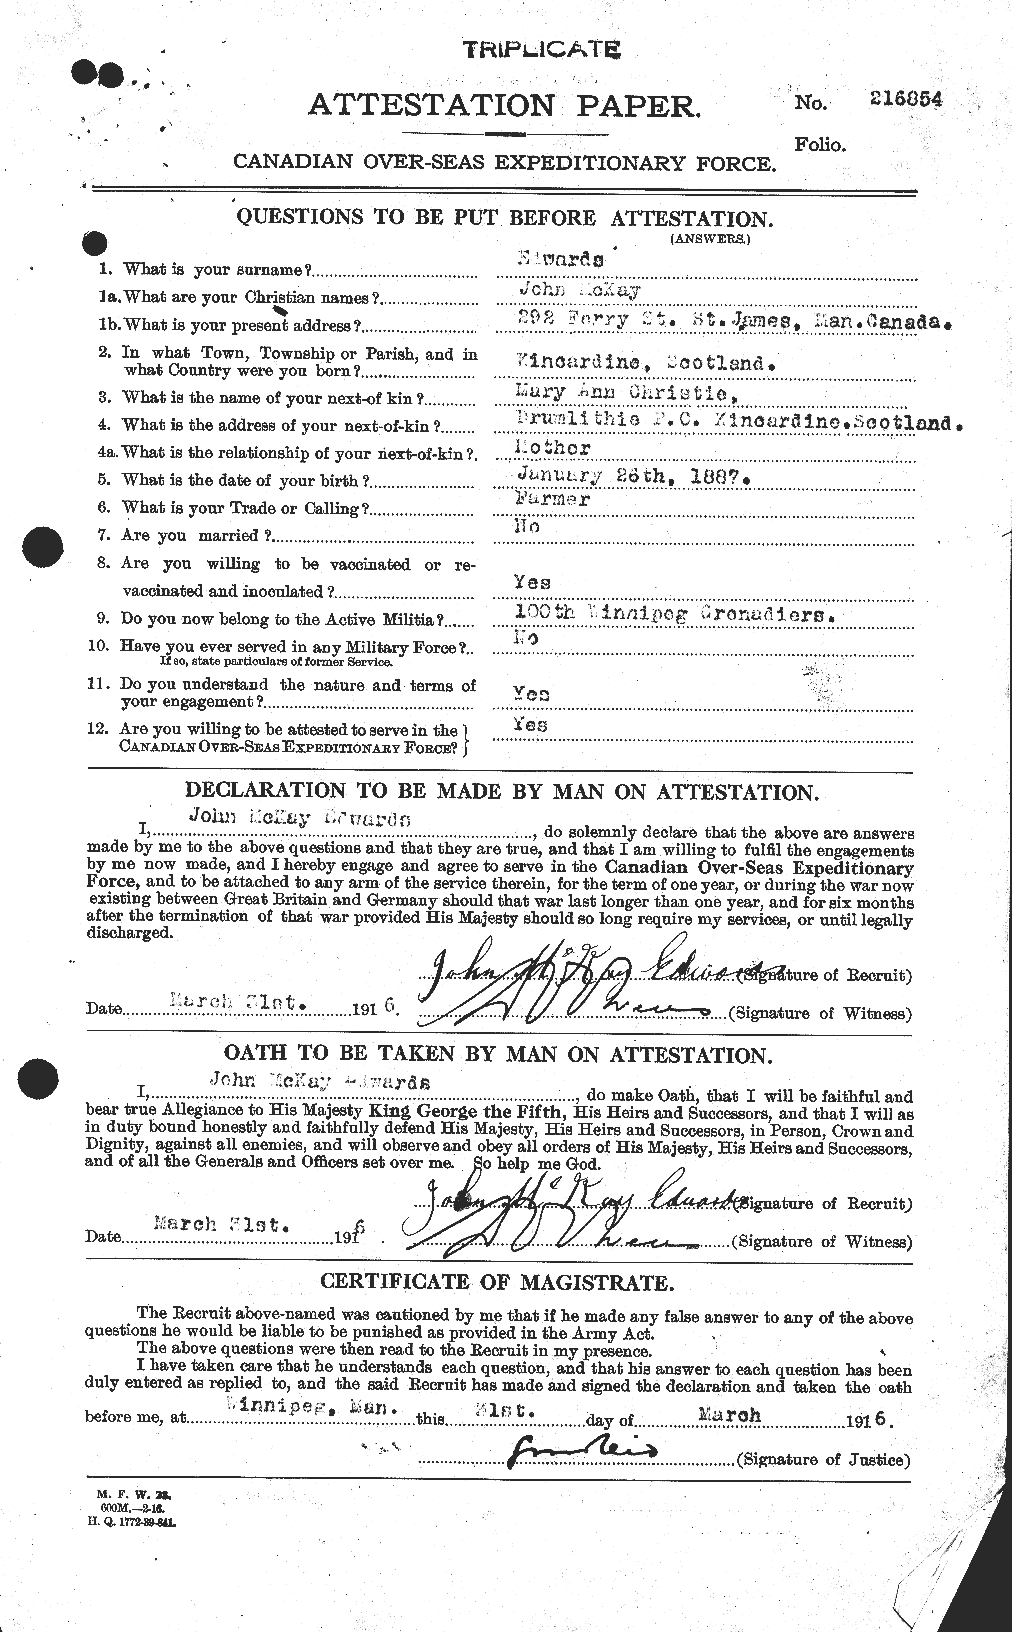 Personnel Records of the First World War - CEF 310147a